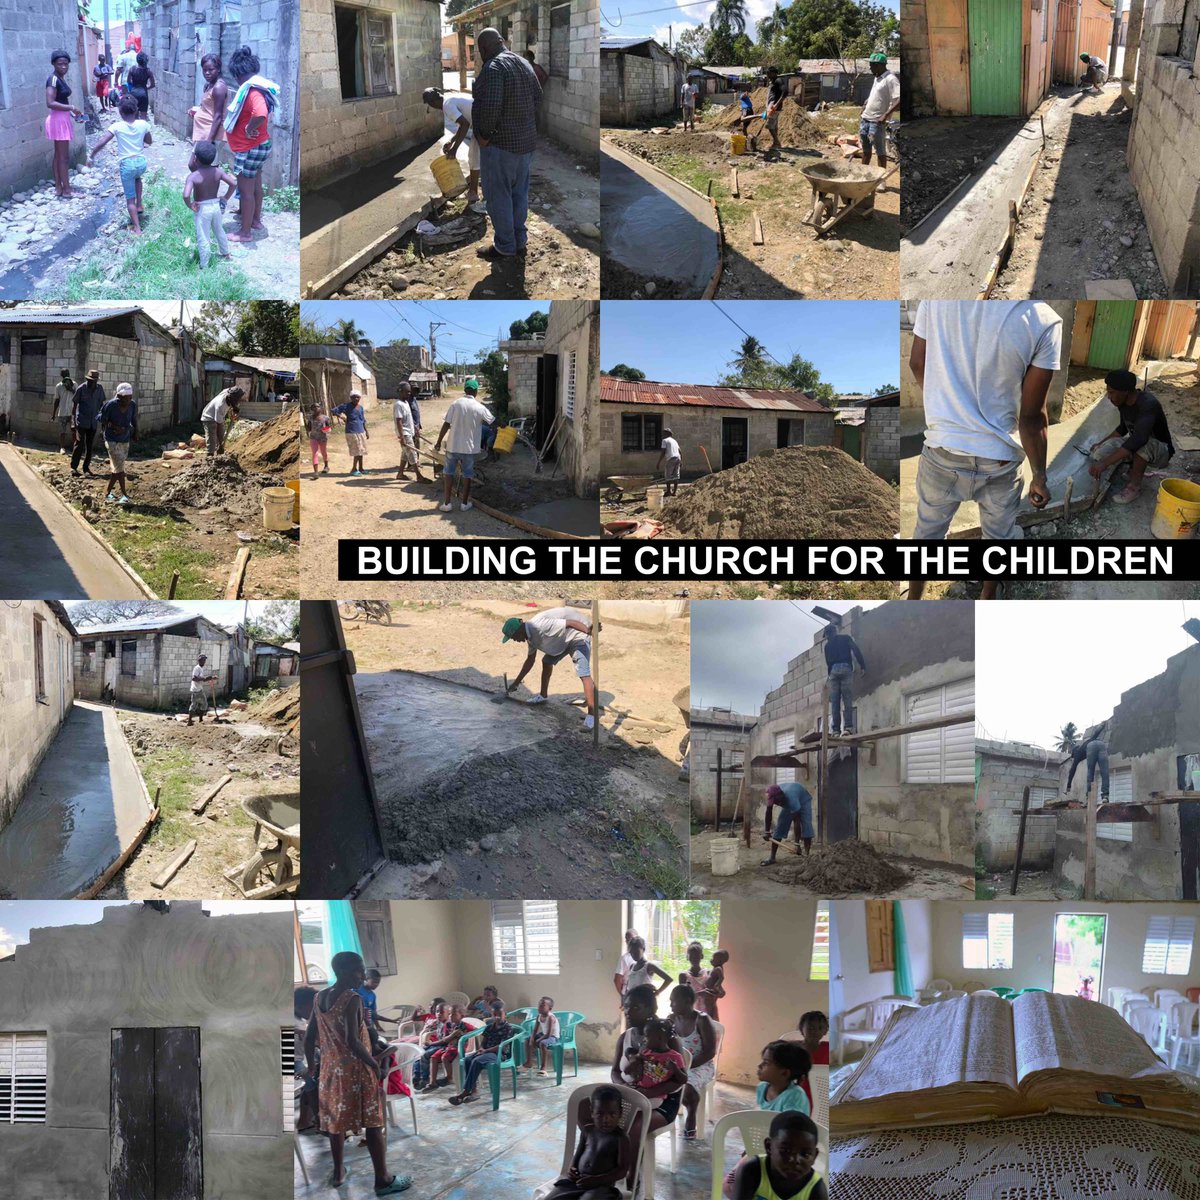 Church is currently under construction.
Let’s not forget the needs of the children. In July 2024, we will be providing school supplies, clothing, and food.

Contribute here:
$ETH - HelpingChildren.eth
$BTC - 3LwesHt1Qpt7X1sXRJeM2u7YSGagSv16u2
$SOL -